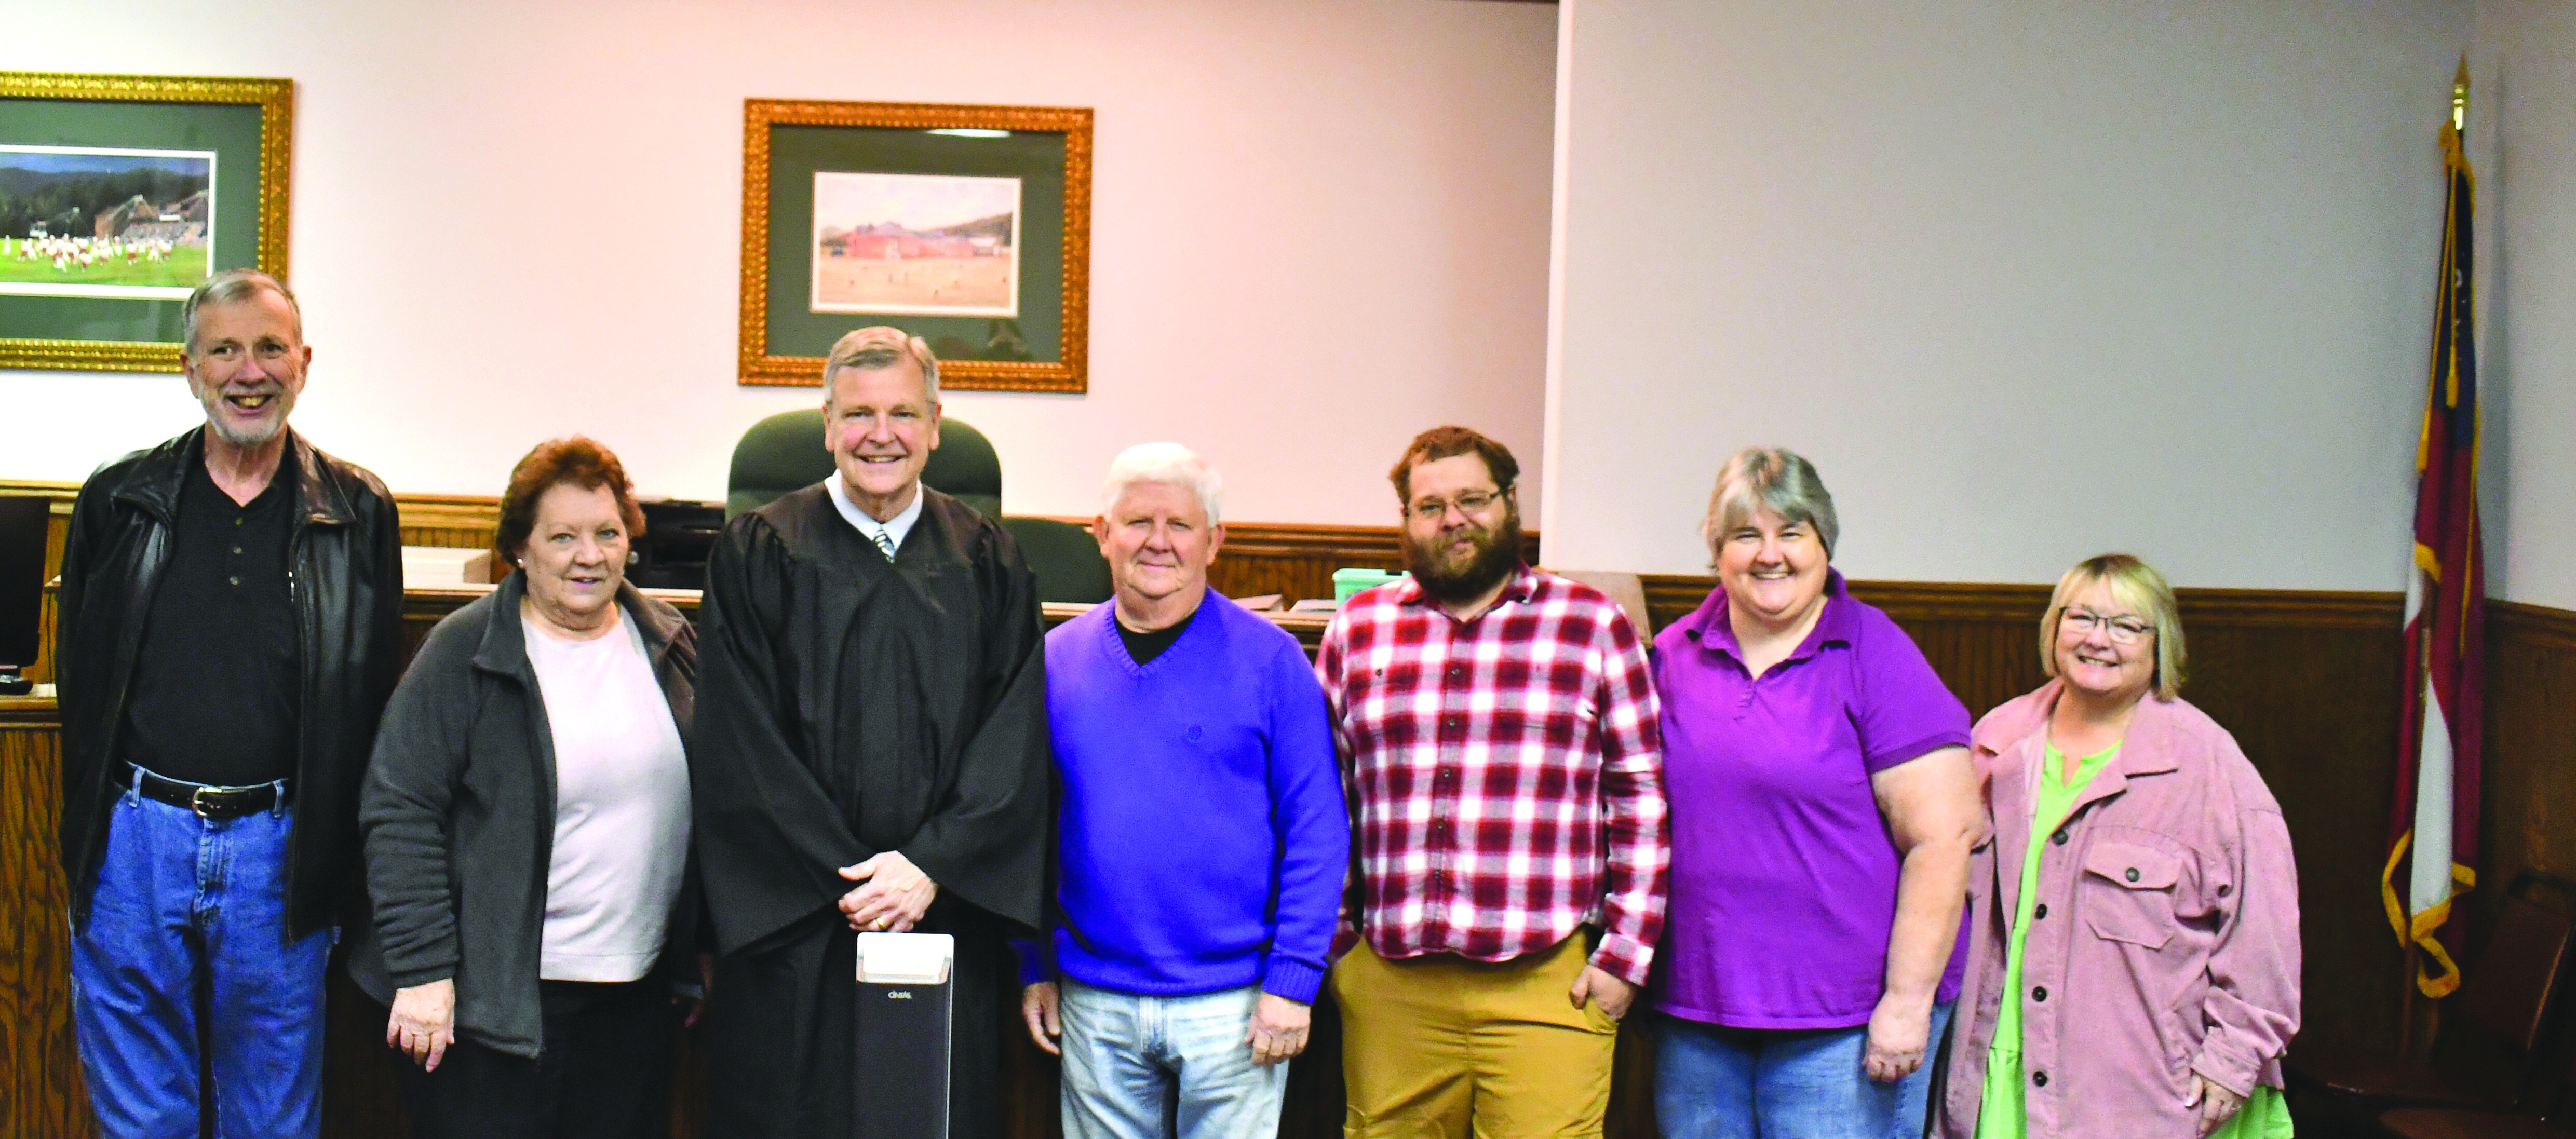 Megan Horn/The Clayton Tribune. Probate Judge Carlton Hobie Jones, III swears in Rabun County Election Board members and officials in the Probate Courtroom Wednesday morning. Pictured are Chairman Roy Lovell; Liz Dixon; Jones; Jimmy Bleckley; Deputy Registrar Derik Pendrey; Elections and Voter Registration Director Tammy Whitmire; and Deputy Registrar Lynne Ramey. 